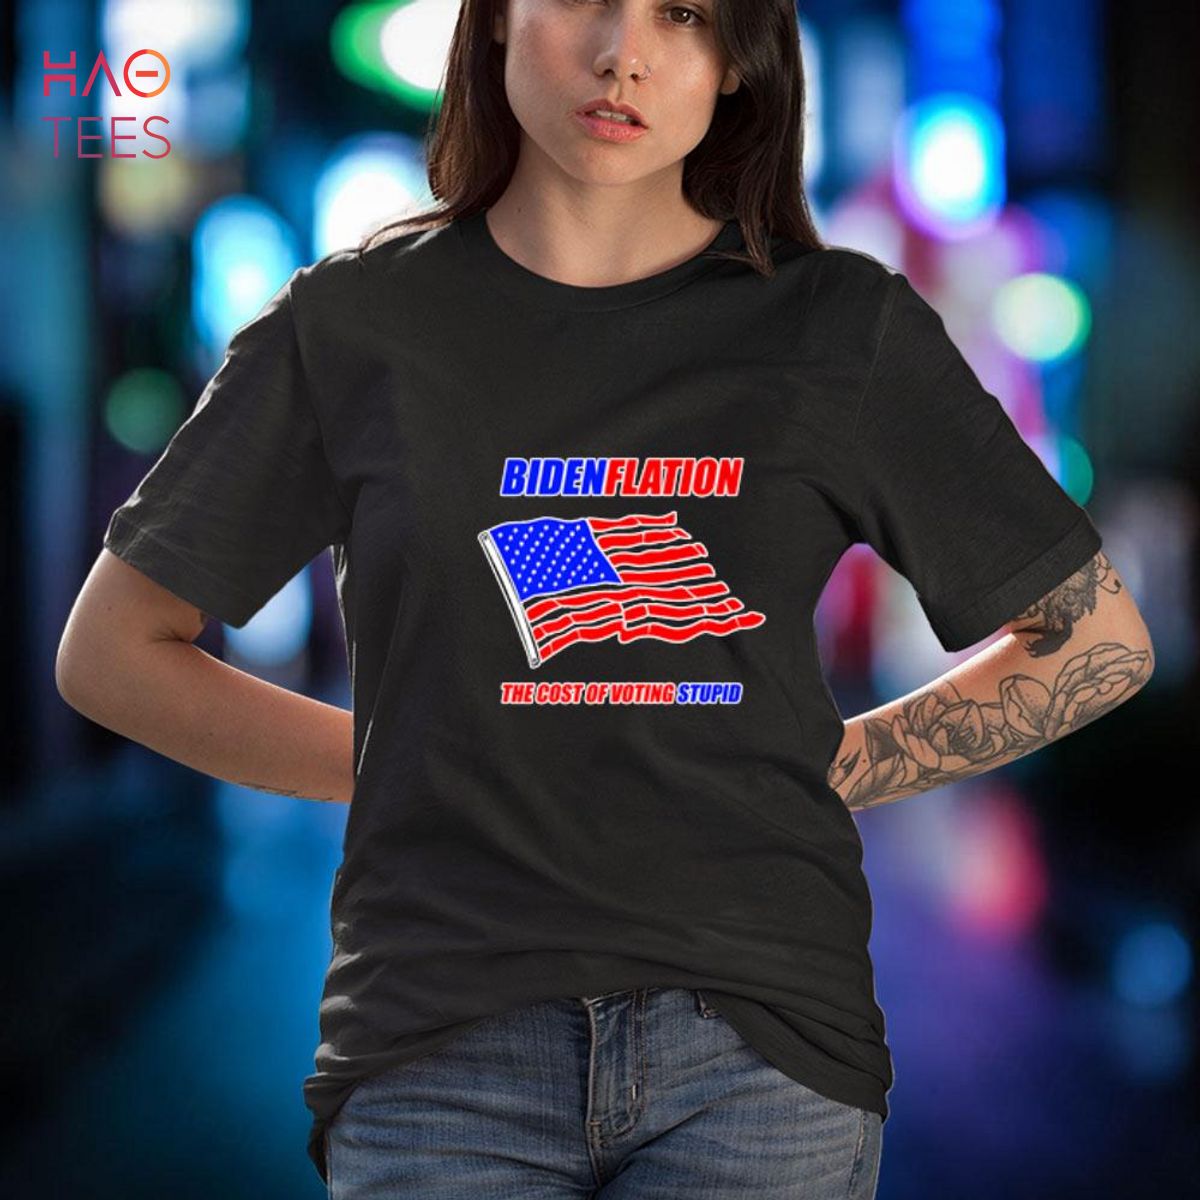 Bidenflation The Cost Of Voting Stupid Funny Political Gift Shirt